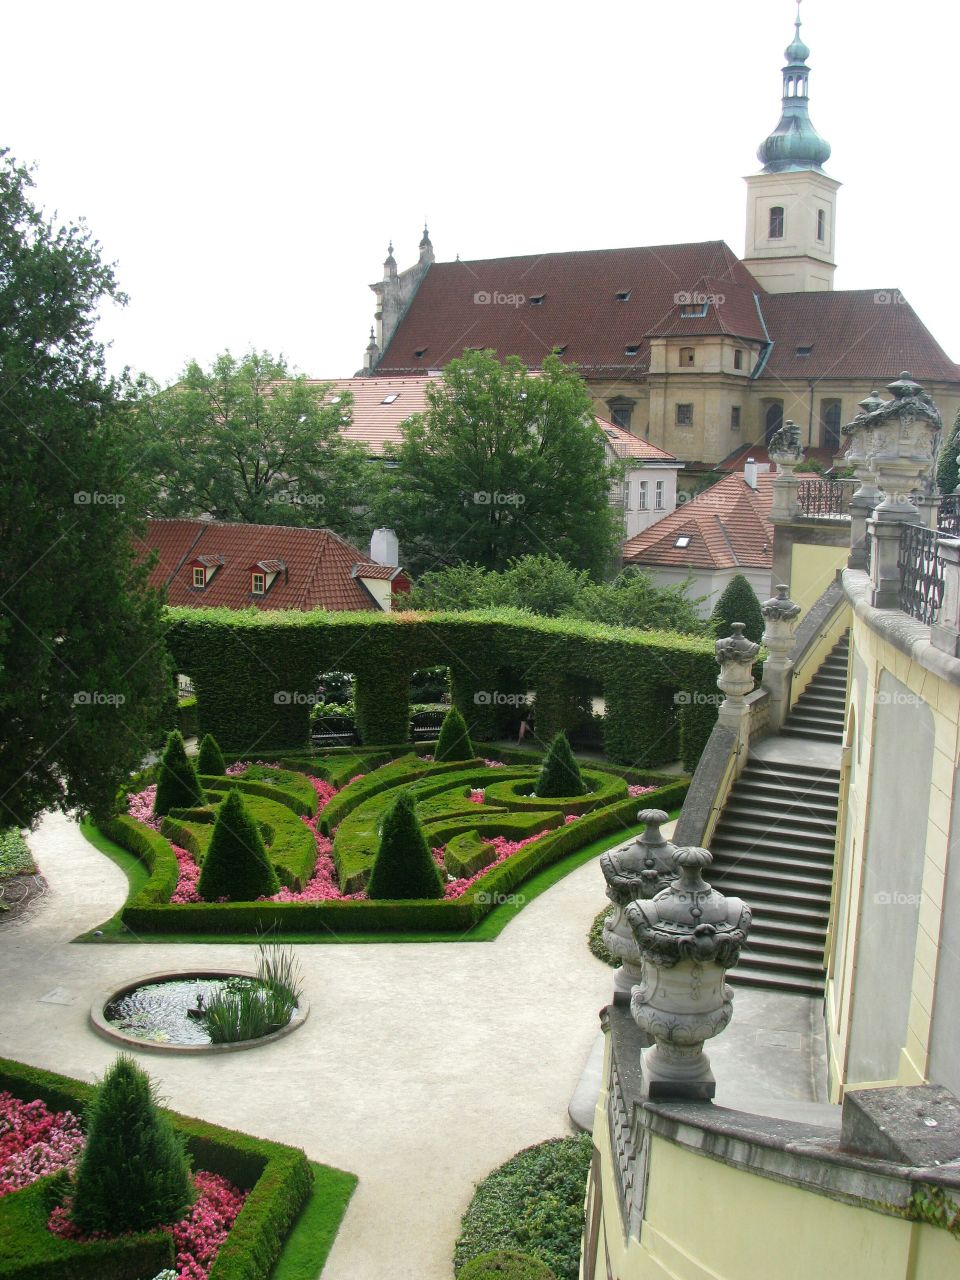 The Vrtba Garden and The church of Our Lady Victorious in Prague